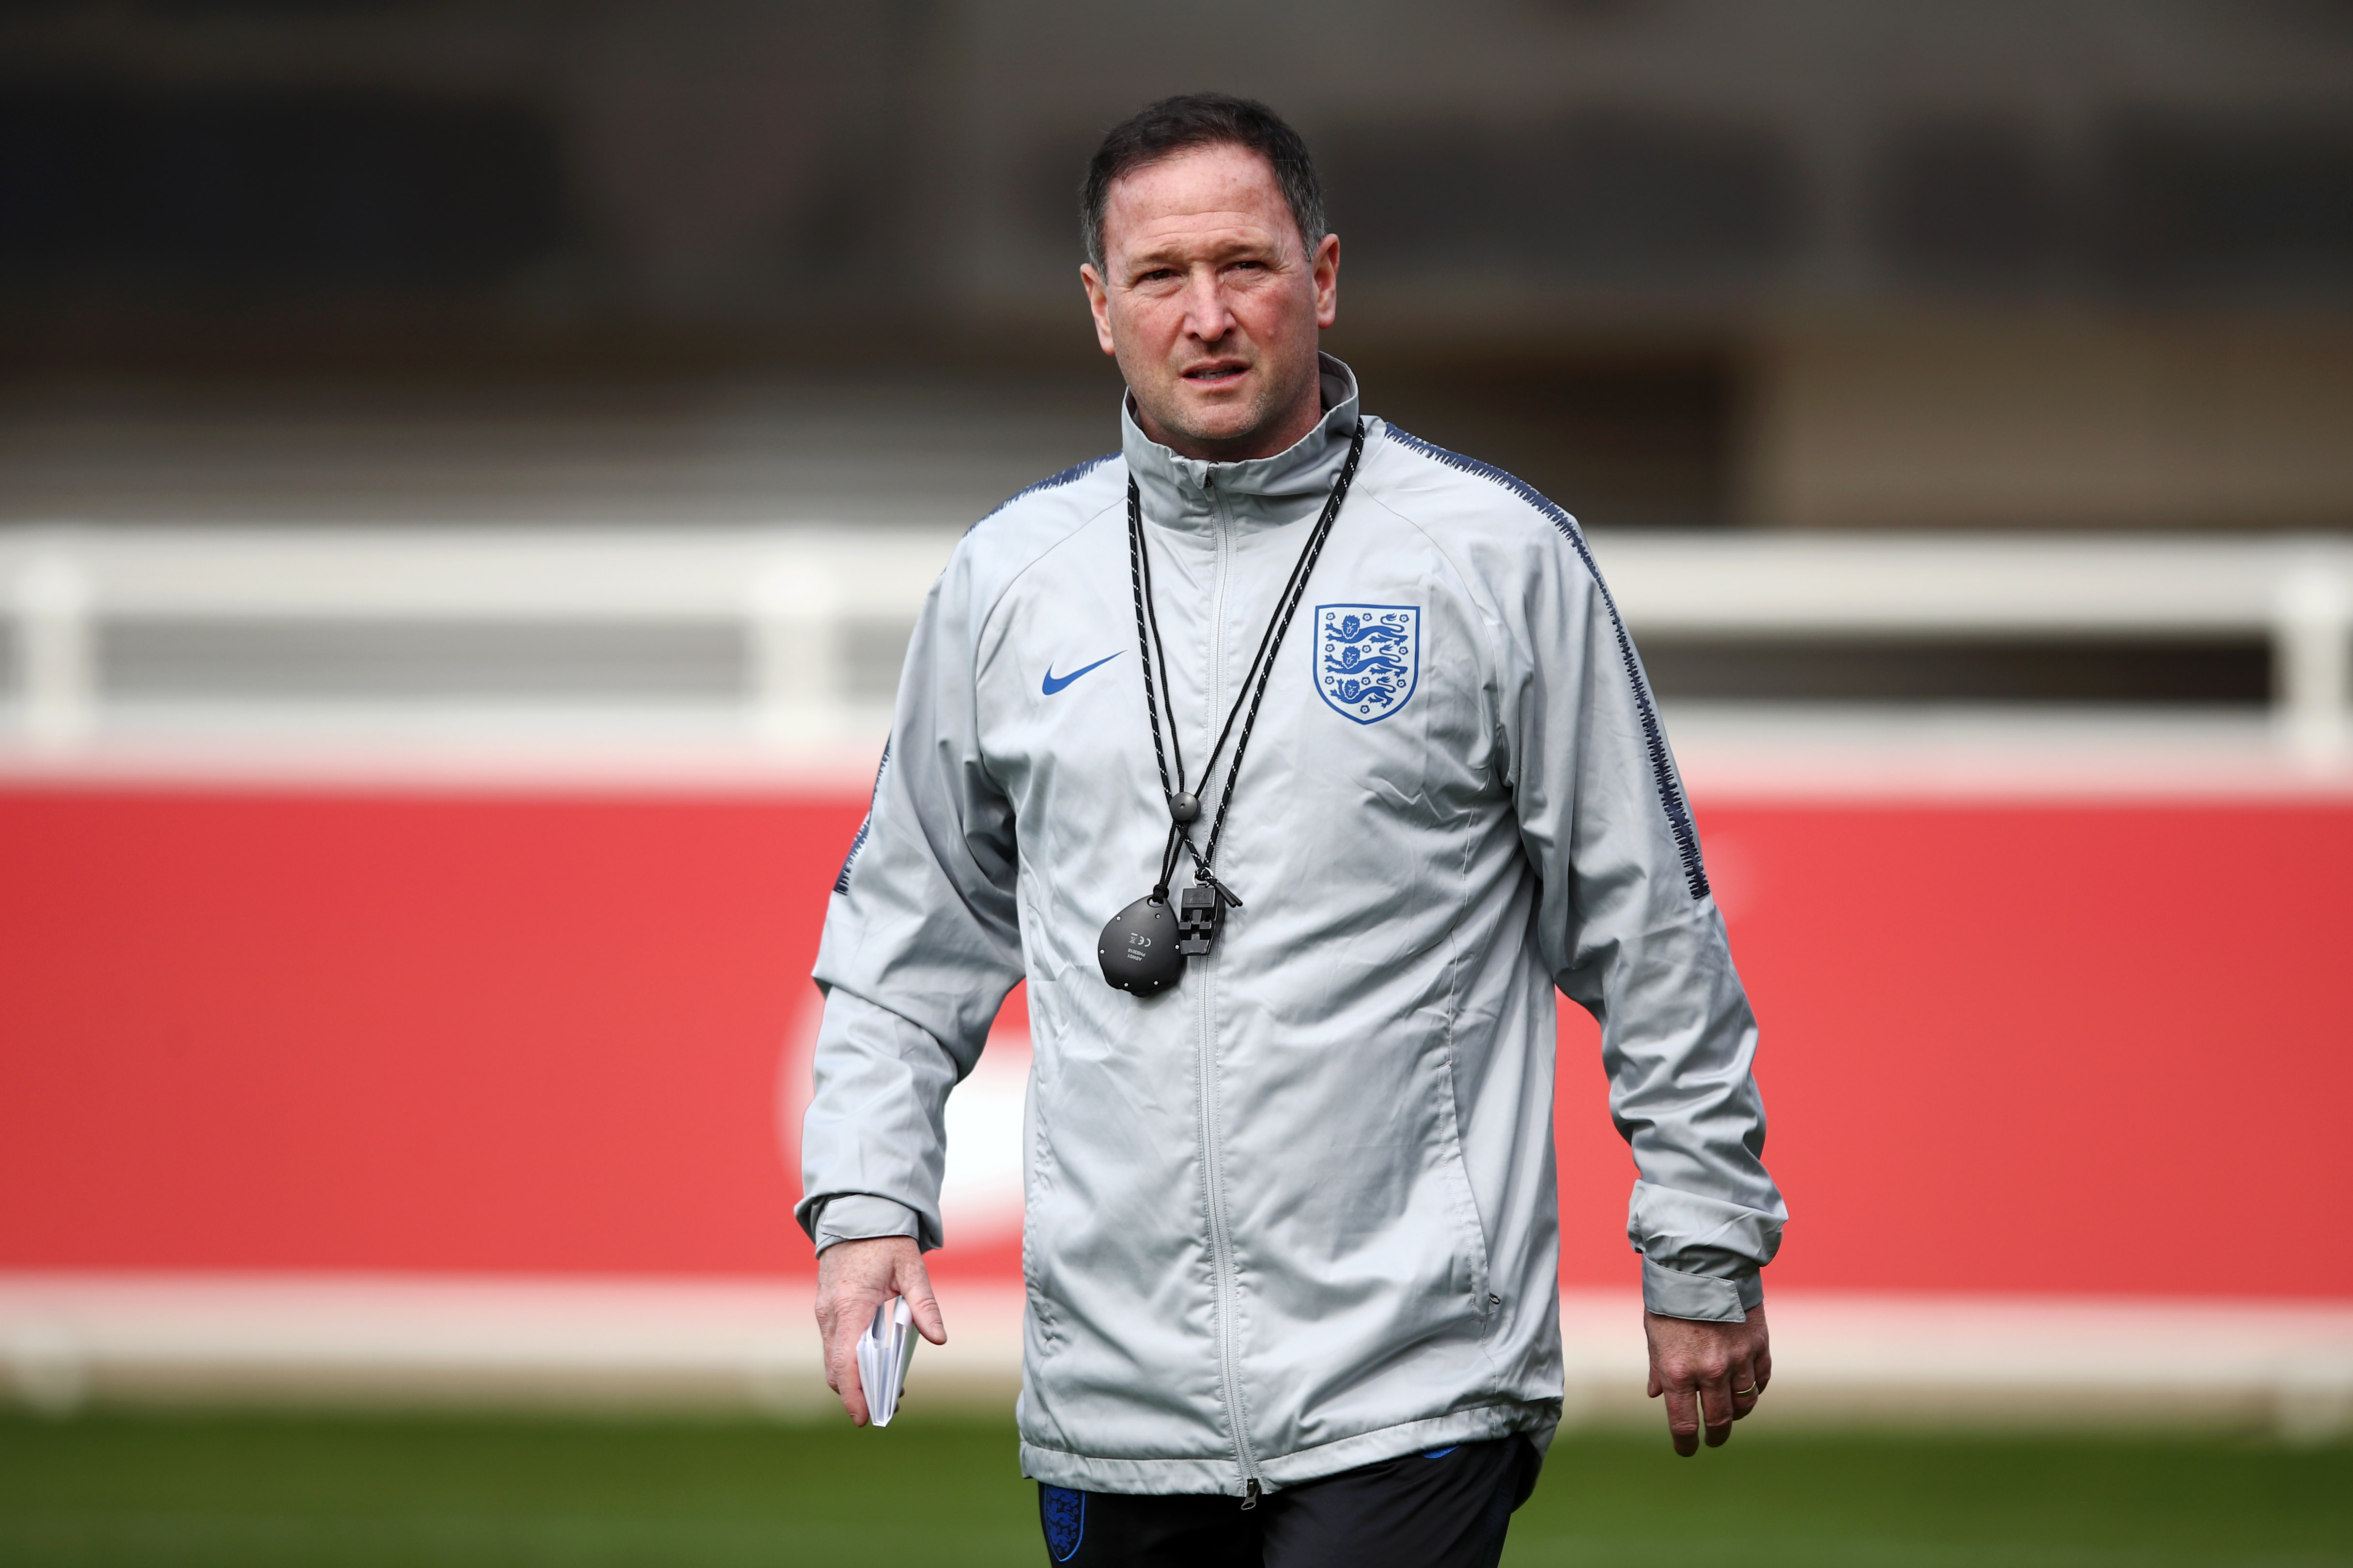 BURTON-UPON-TRENT, ENGLAND - MARCH 23: Steve Holland, Assistant Manager of England looks on during a training session ahead of their UEFA European Championship Qualification match against Montenegro at St Georges Park on March 23, 2019 in Burton-upon-Trent, England. (Photo by Marc Atkins/Getty Images)